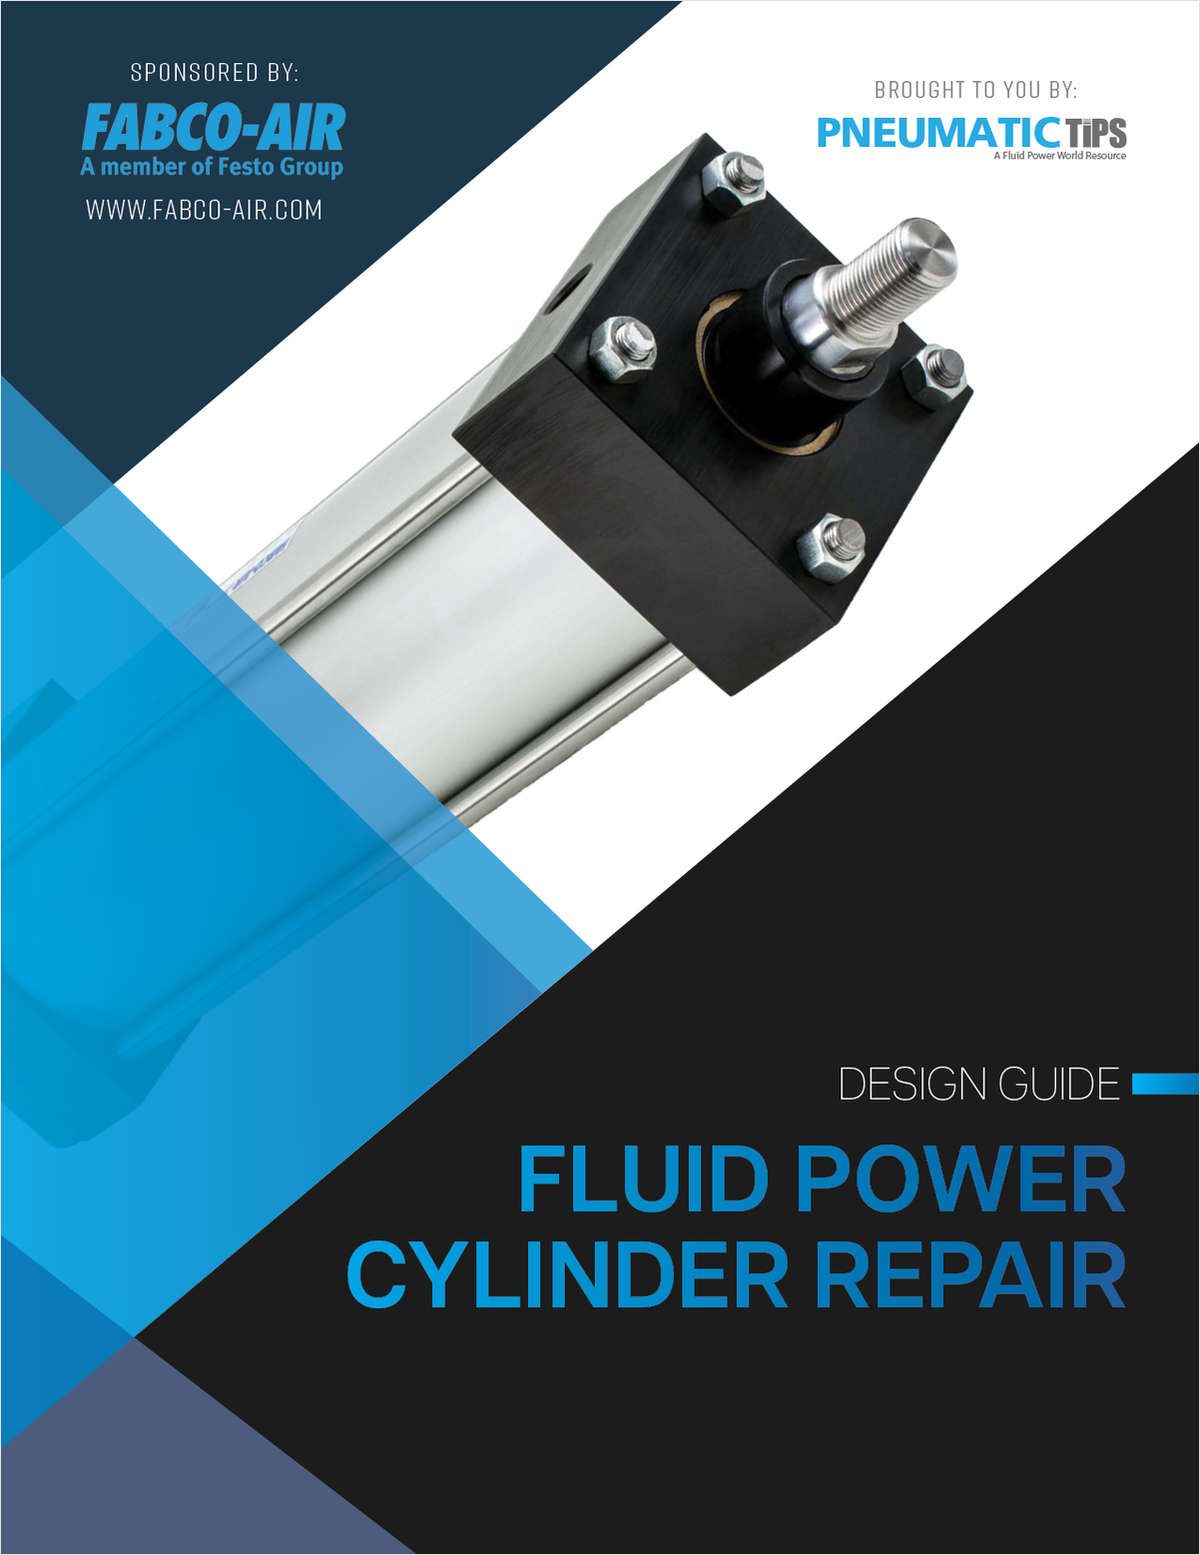 Technical Design Guide on Fluid Power Cylinder Repair and Rebuild